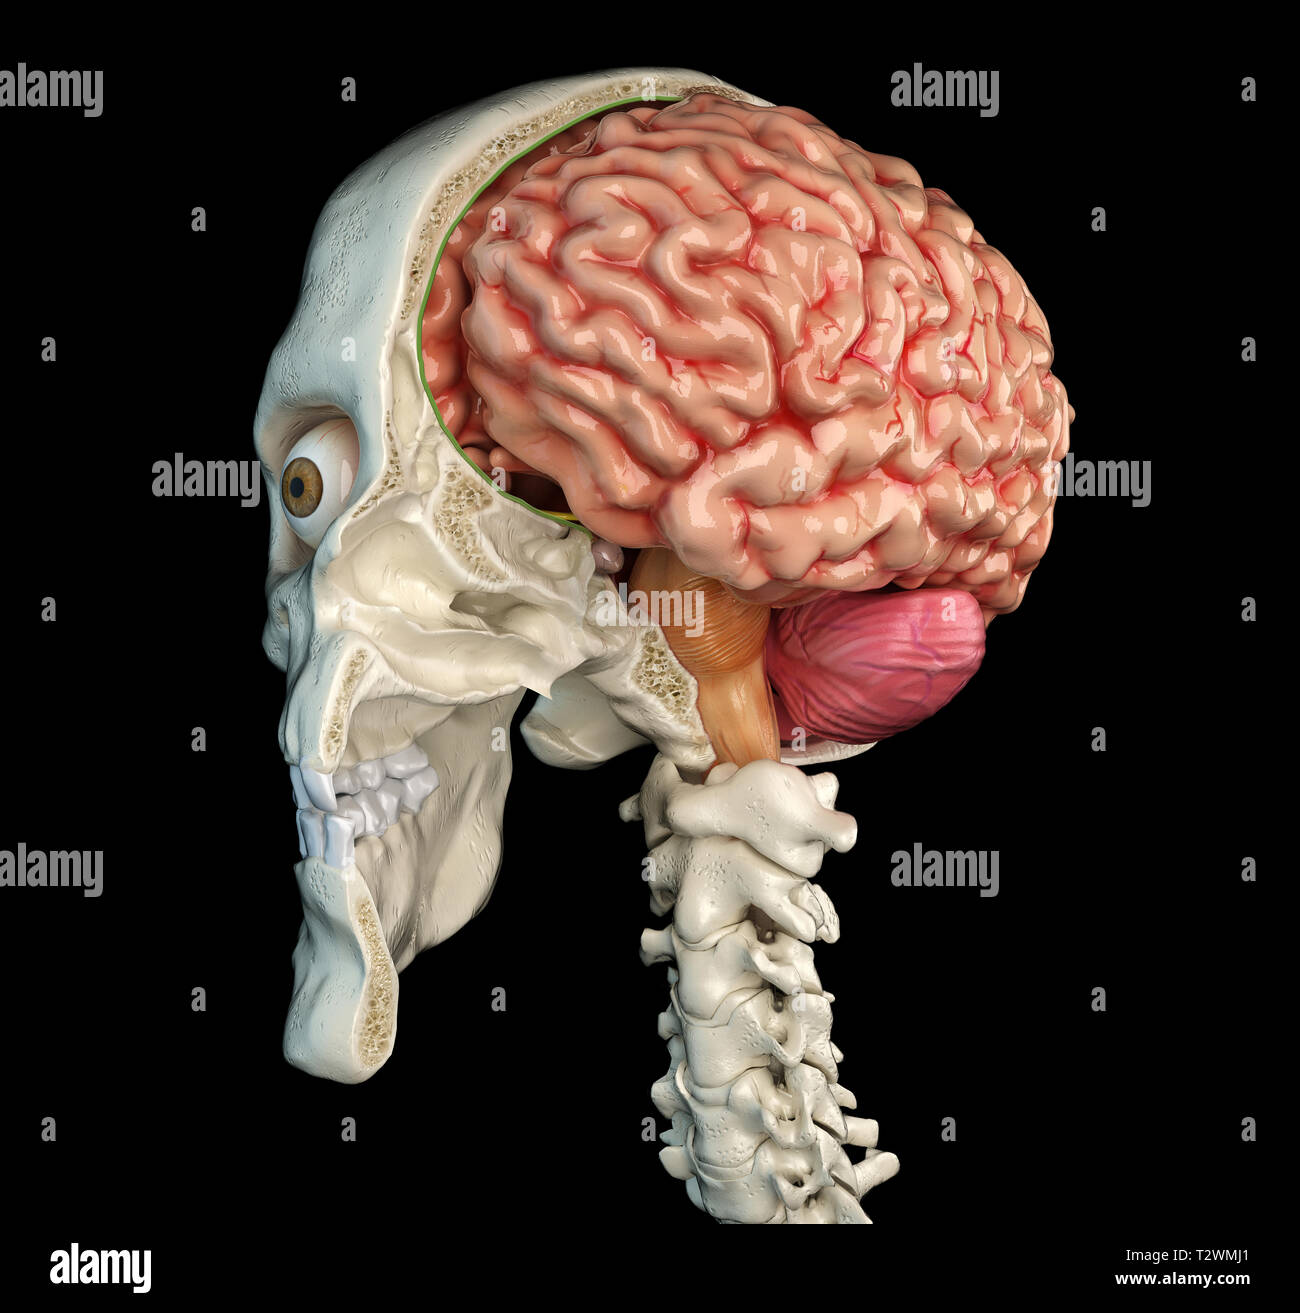 Human skull mid sagittal cross-section with brain. Perspective view on black background. Stock Photo